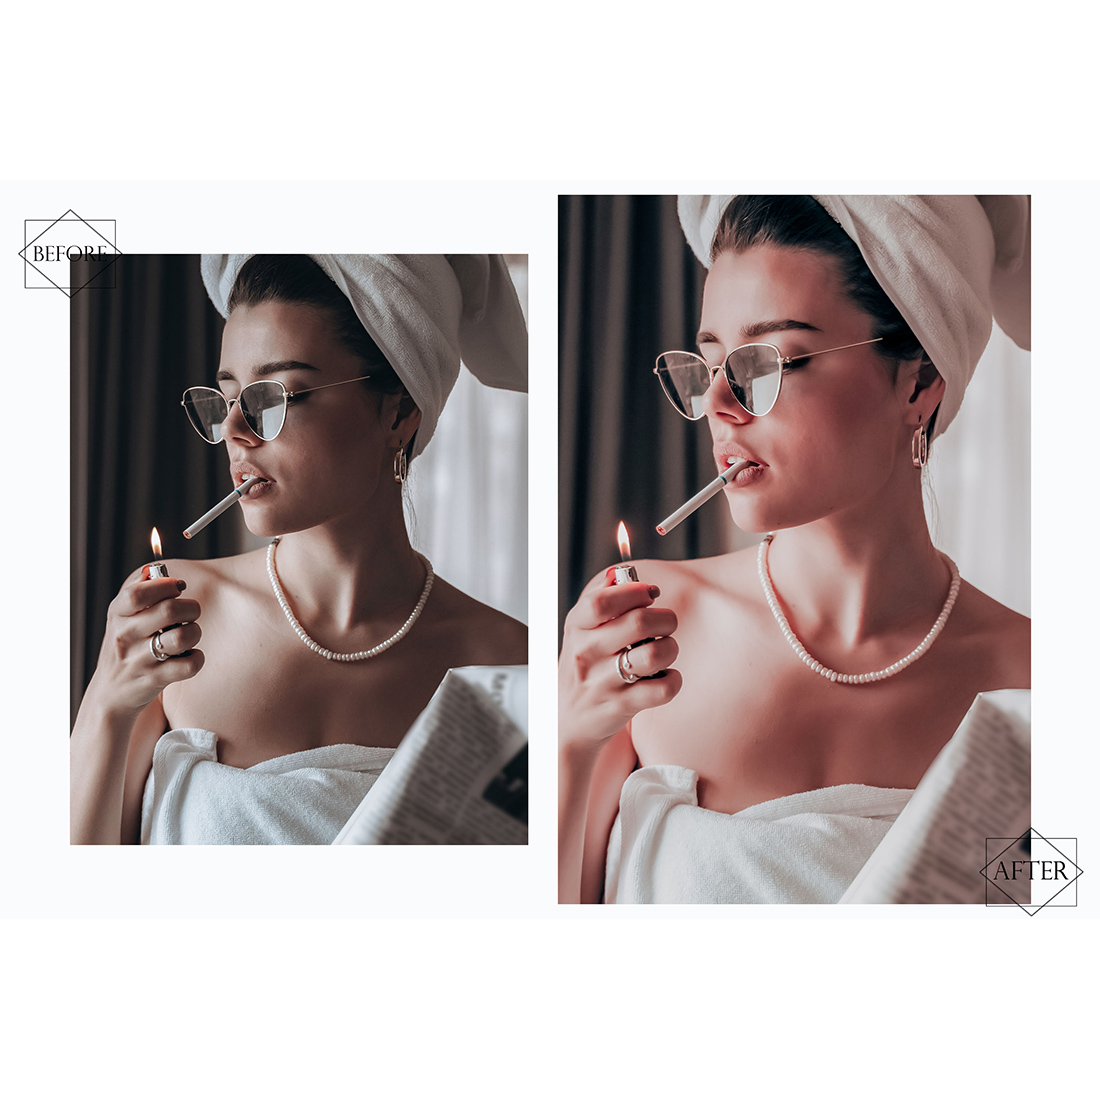 14 Bridal Boudoir Photoshop Actions, Braidsmaids ACR Preset, Wedding Filter, Portrait And Lifestyle Theme For Instagram, Blogger, Outdoor preview image.